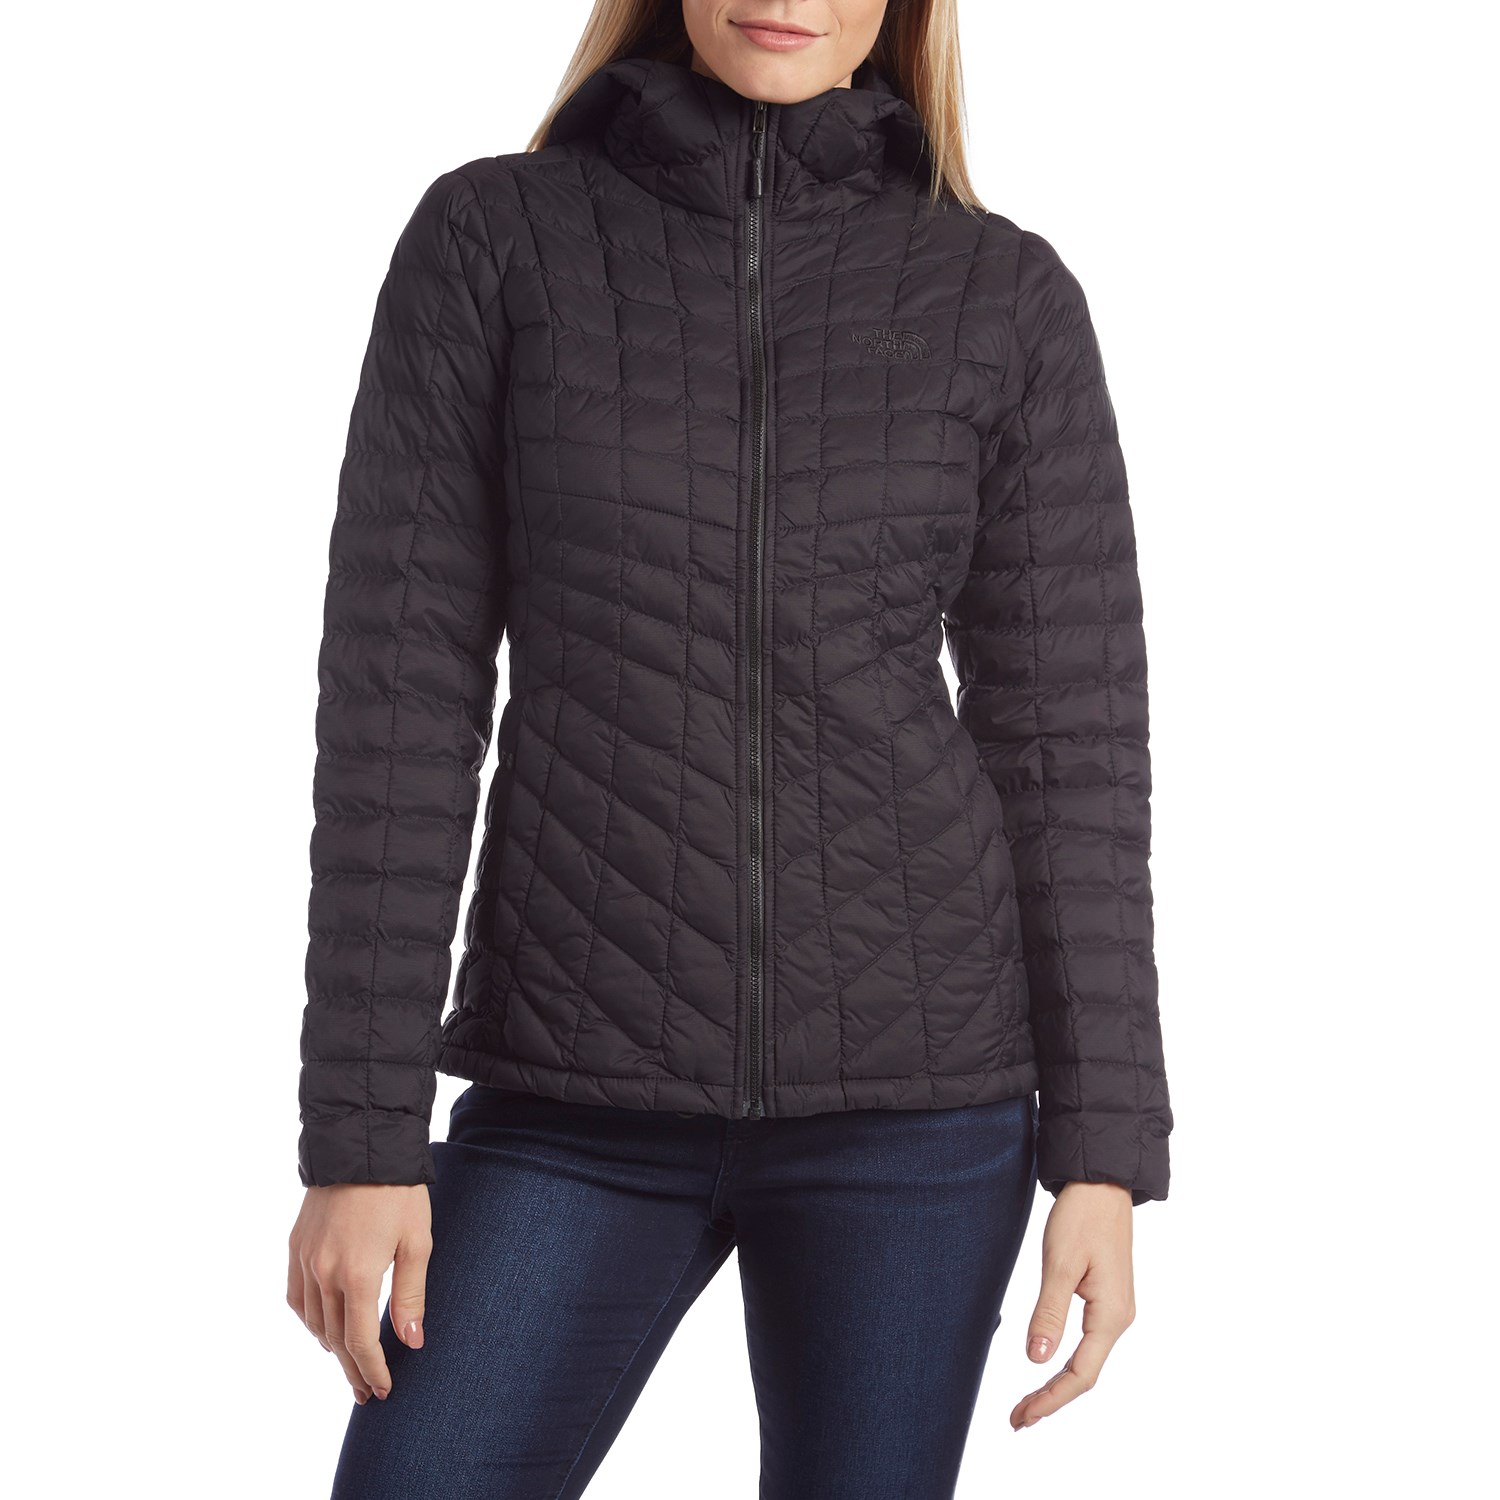 north face thermoball hoodie womens